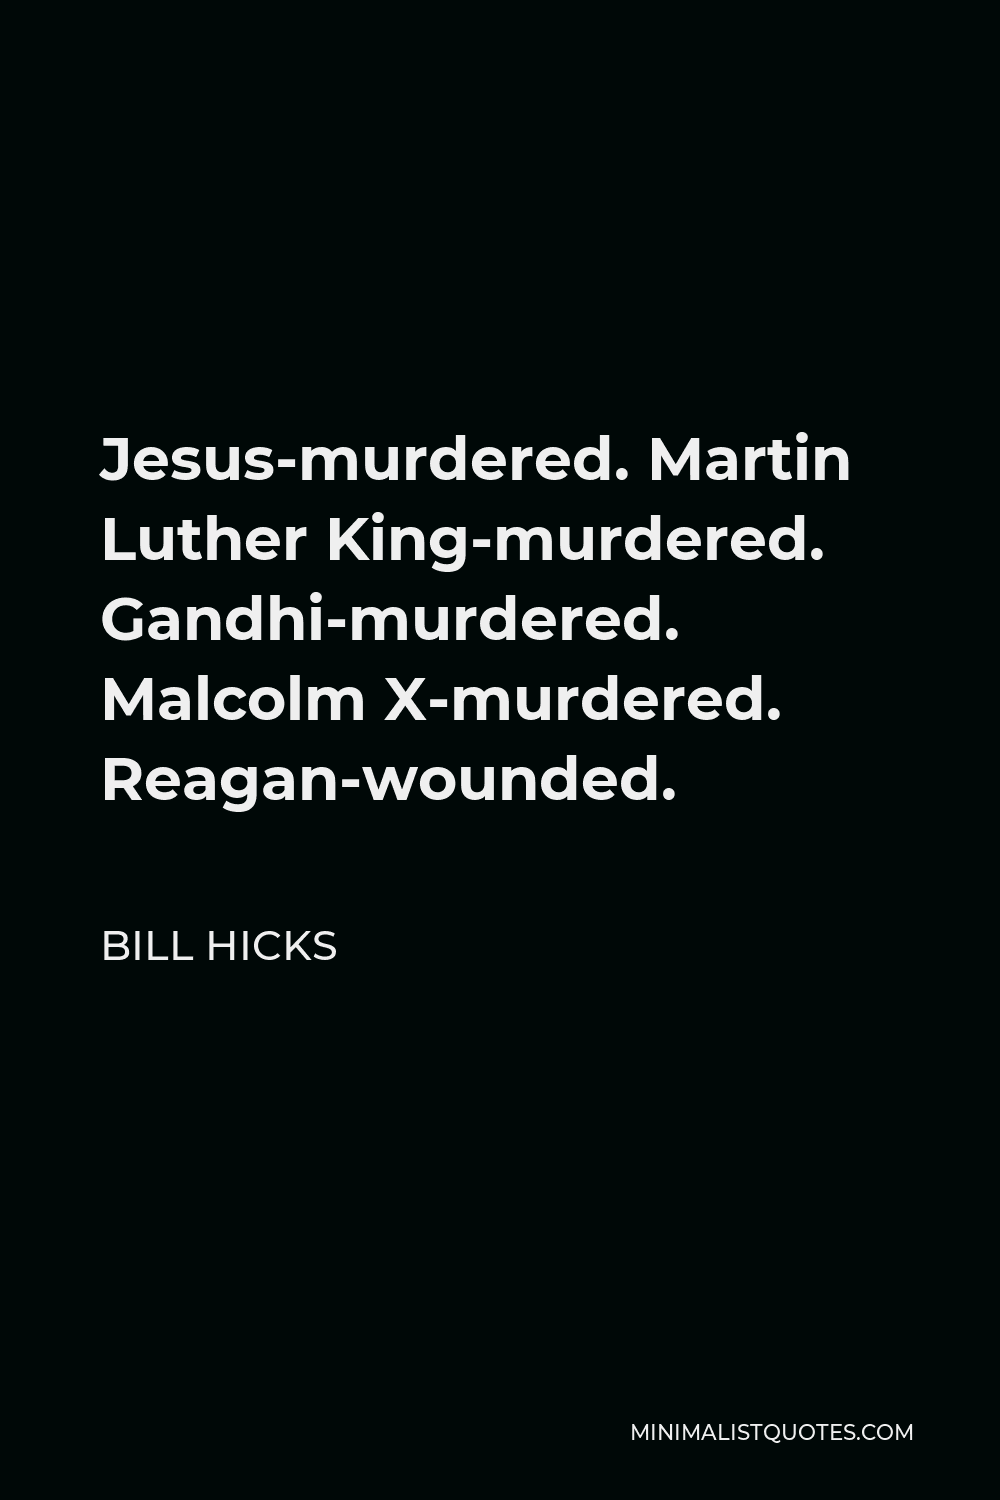 Bill Hicks Quote - Jesus-murdered. Martin Luther King-murdered. Gandhi-murdered. Malcolm X-murdered. Reagan-wounded.